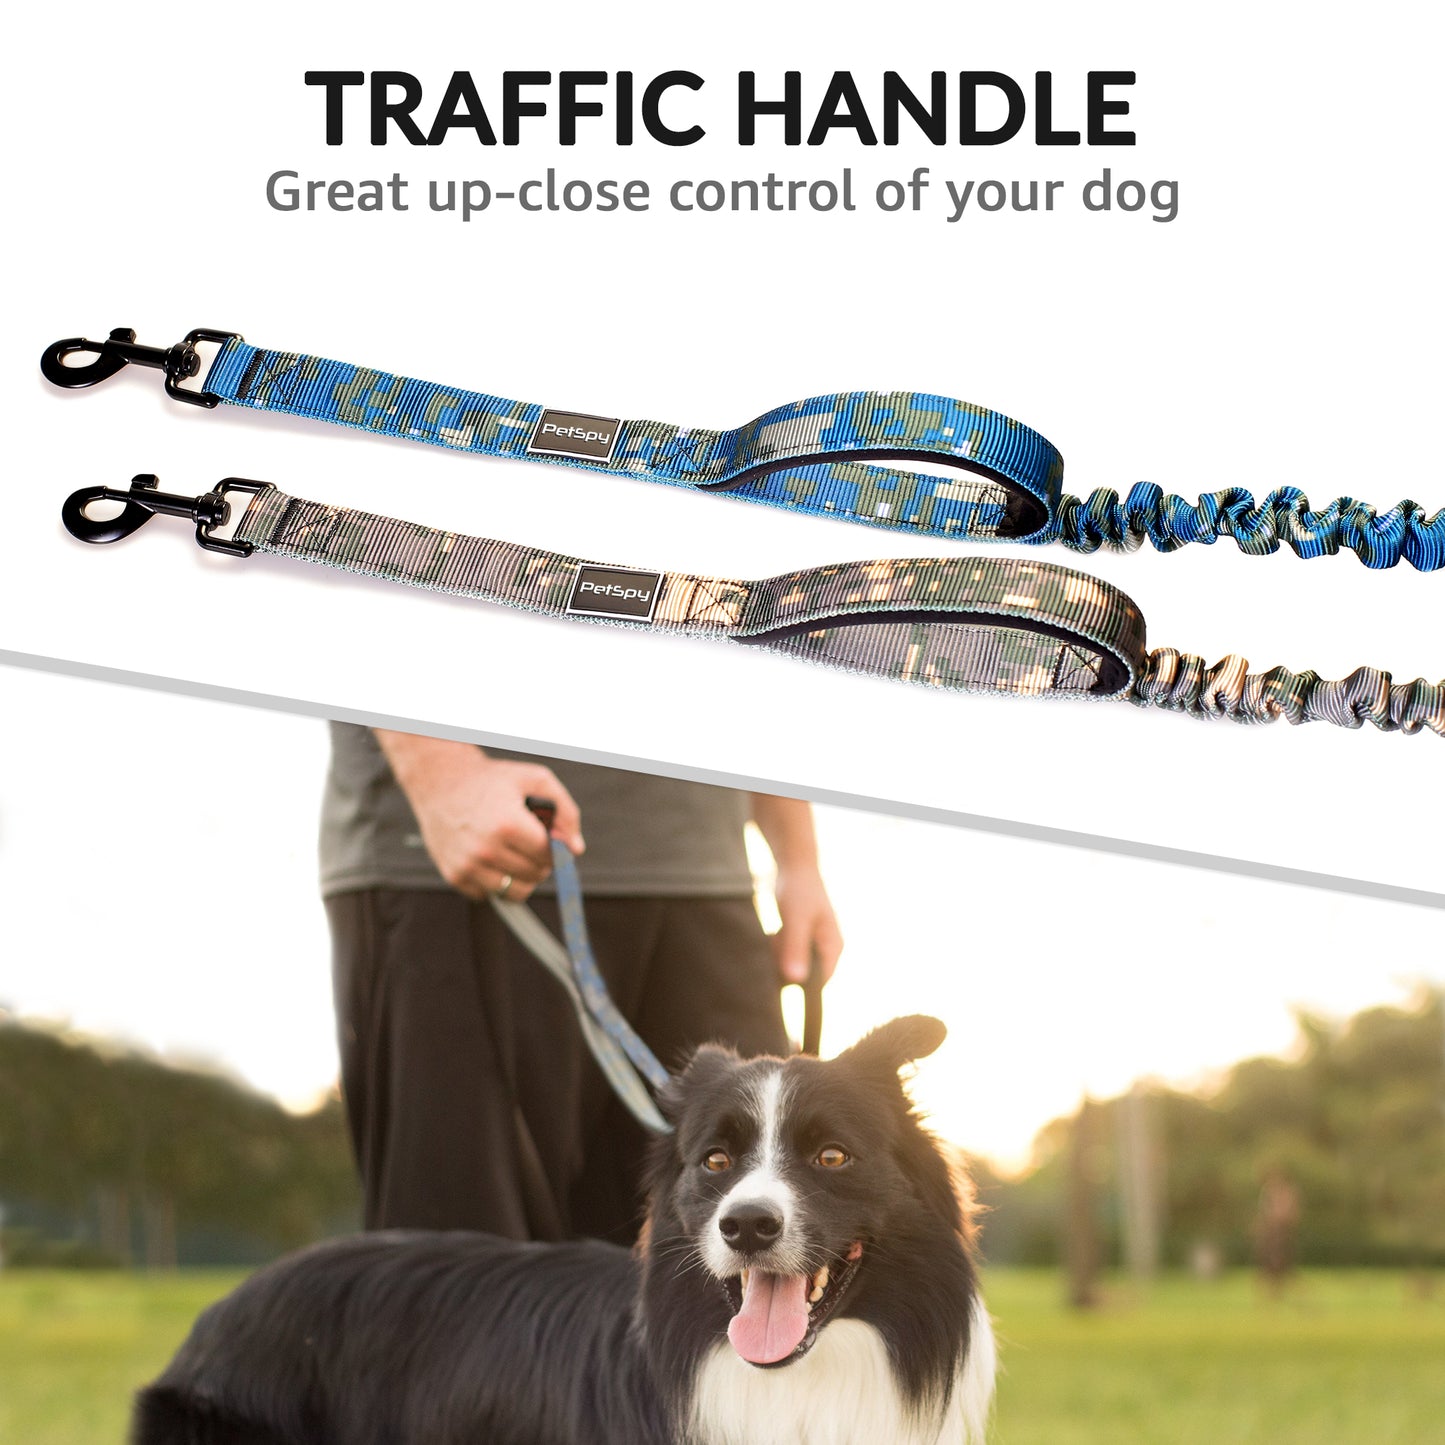 traffic handle great up-close control of your dog